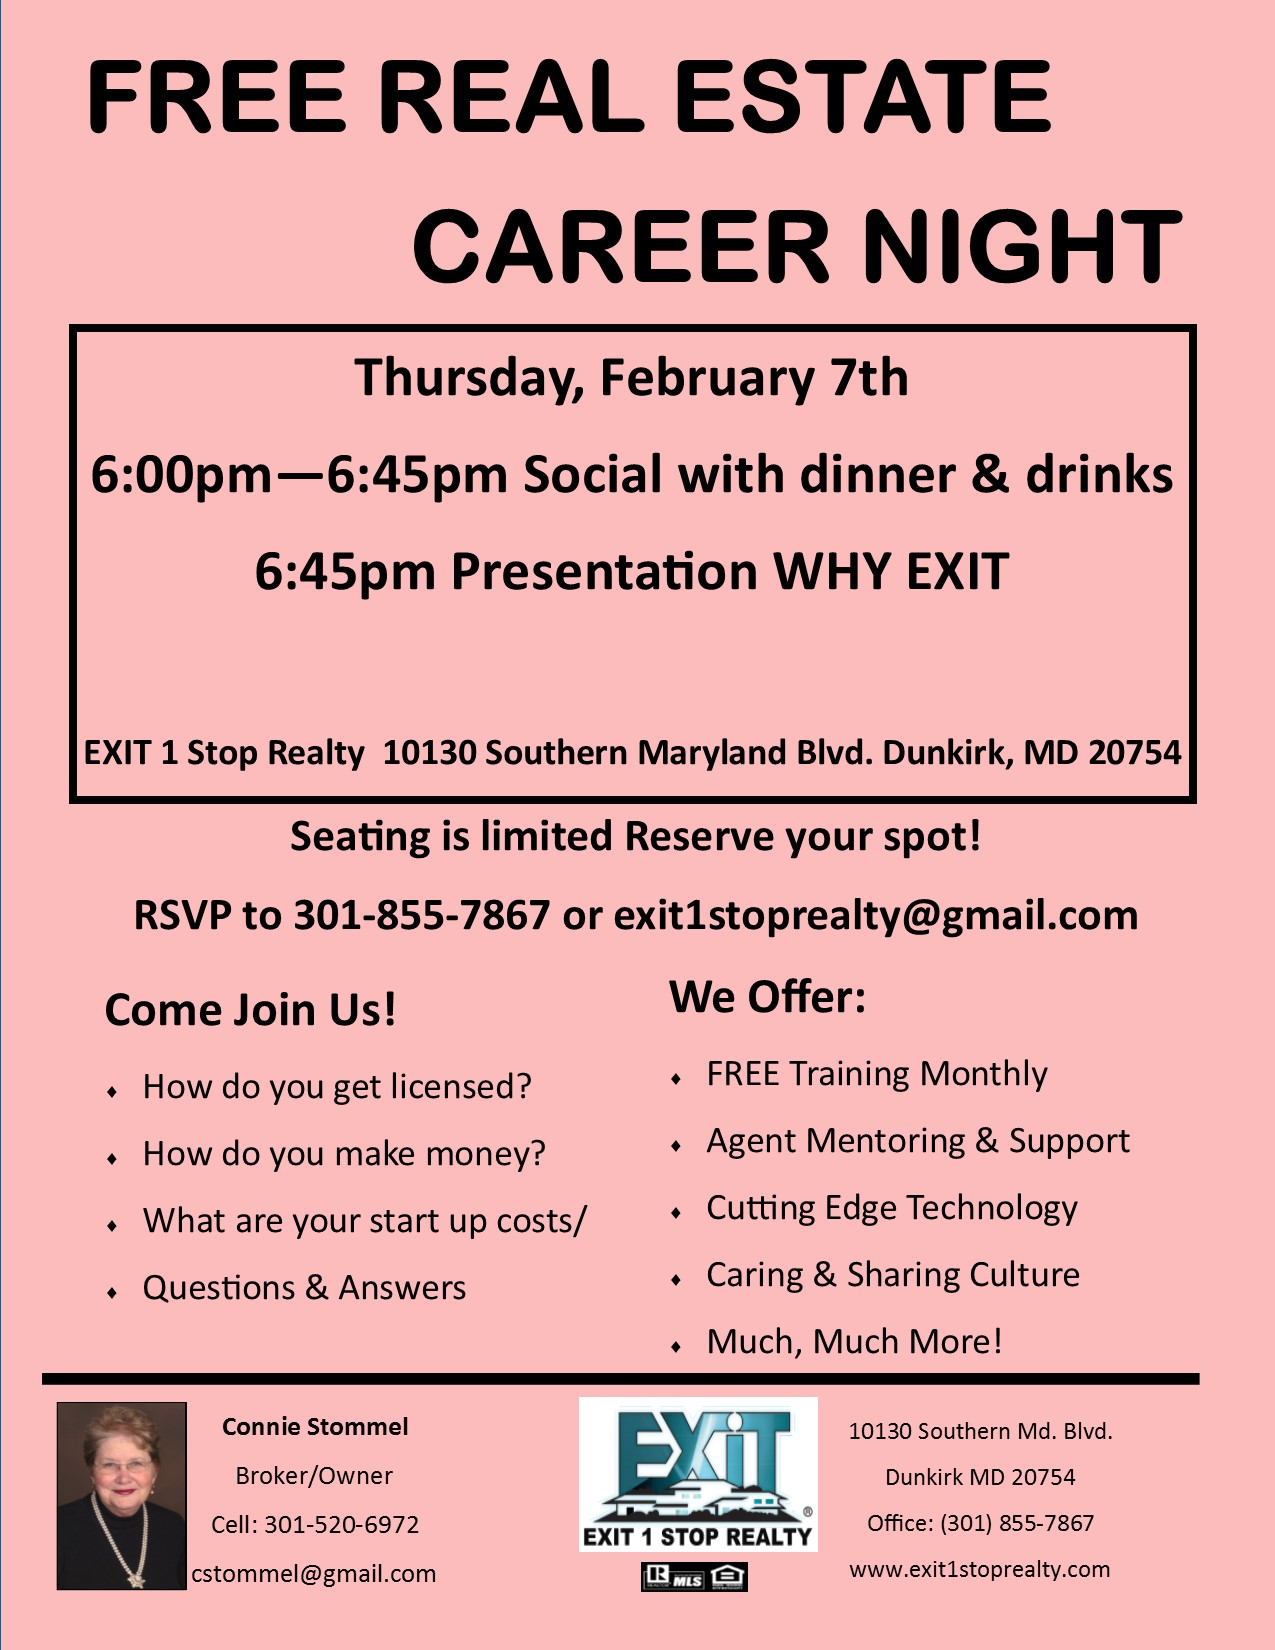 FREE Real Estate Career Night- EXIT 1 Stop Realty, Dunkirk MD